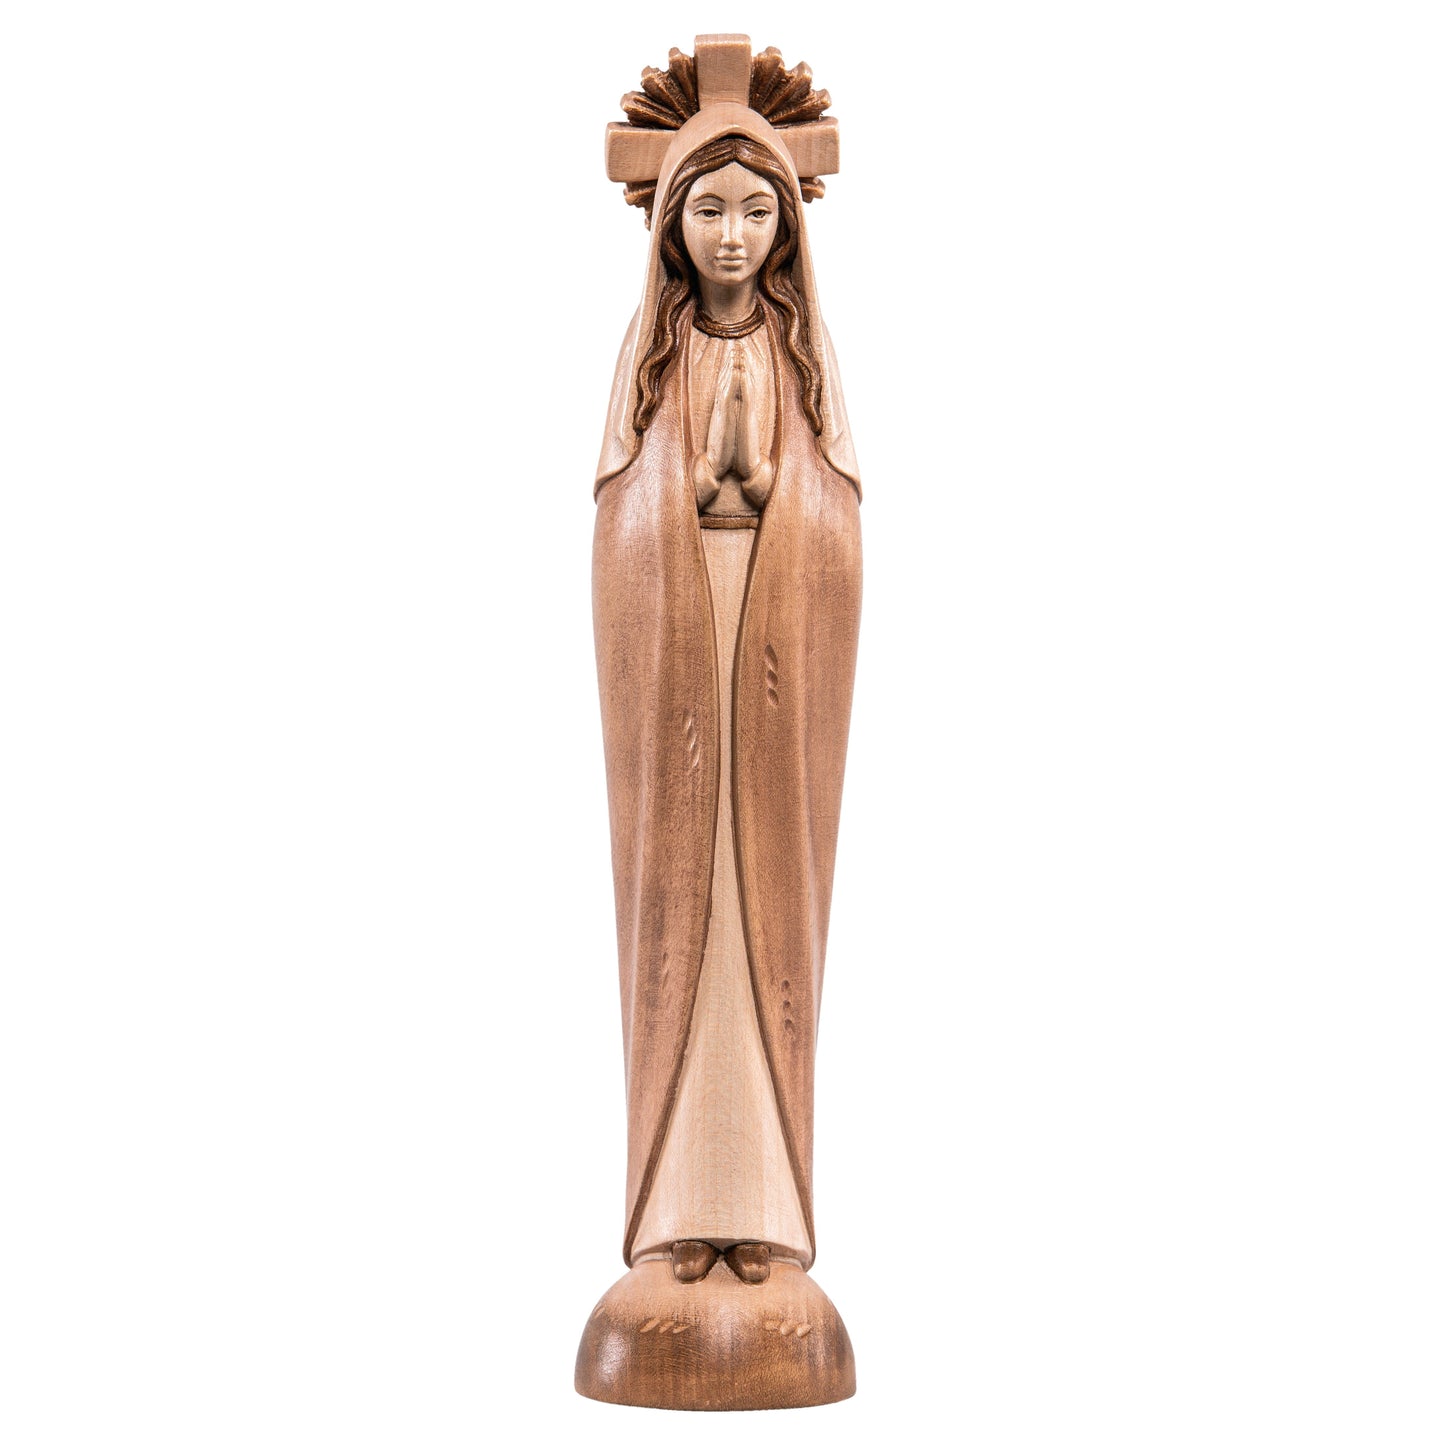 MONDO CATTOLICO Glossy / 15 cm (5.9 in) Wooden statue of Madonna stylized